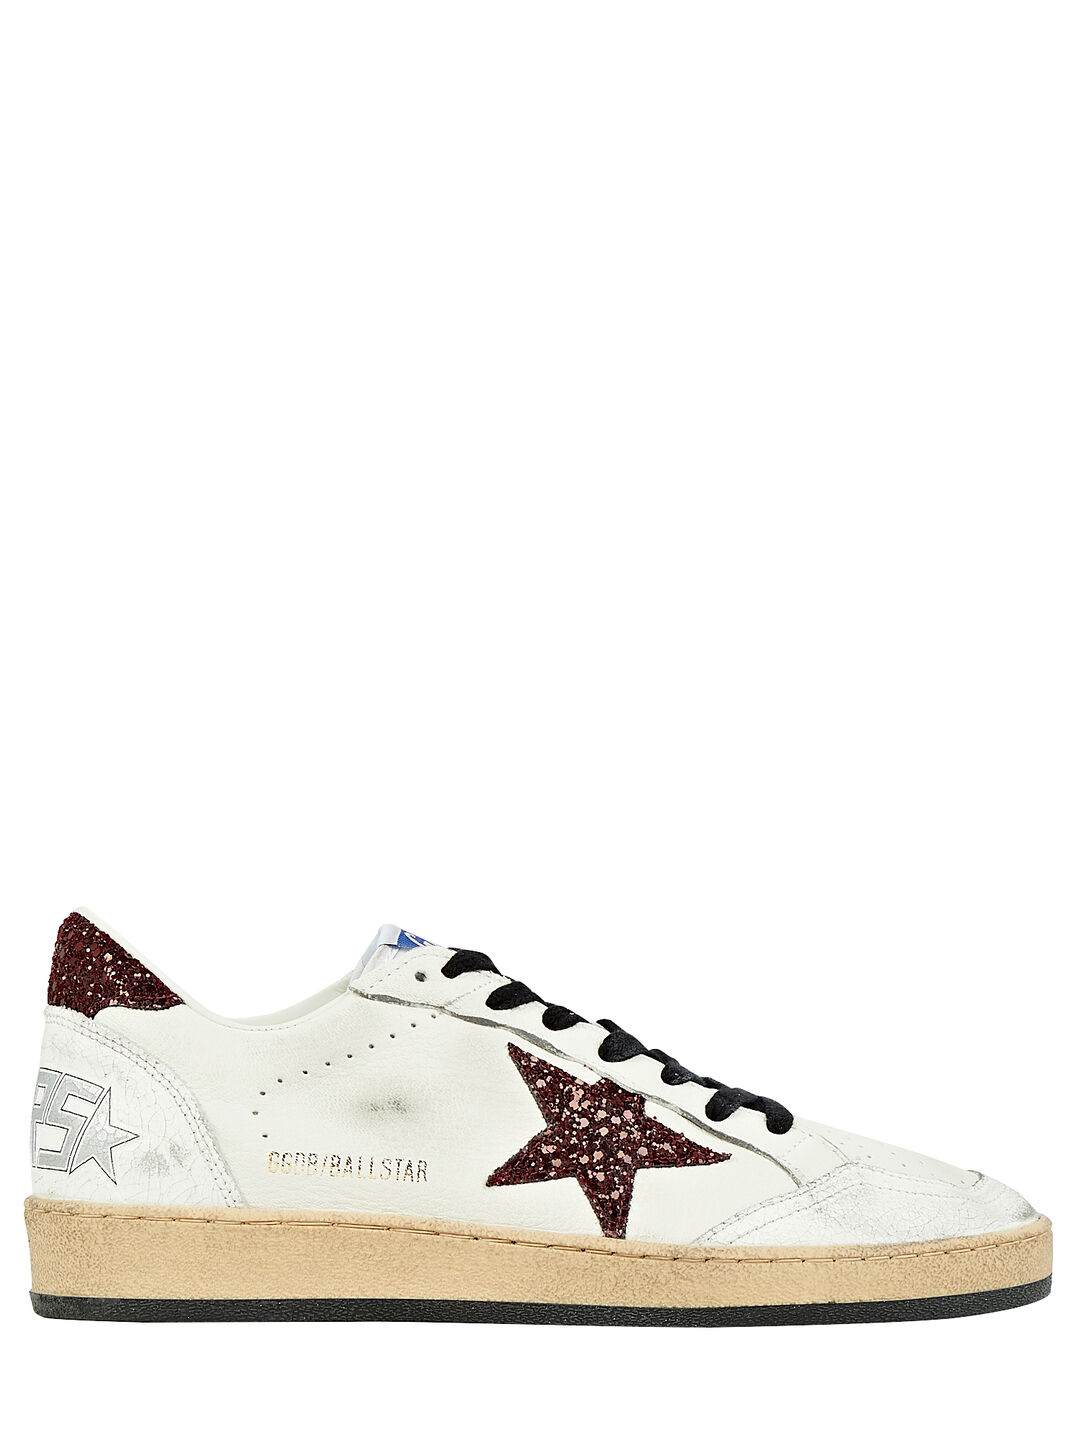 Golden Ball Star Leather Sneakers |